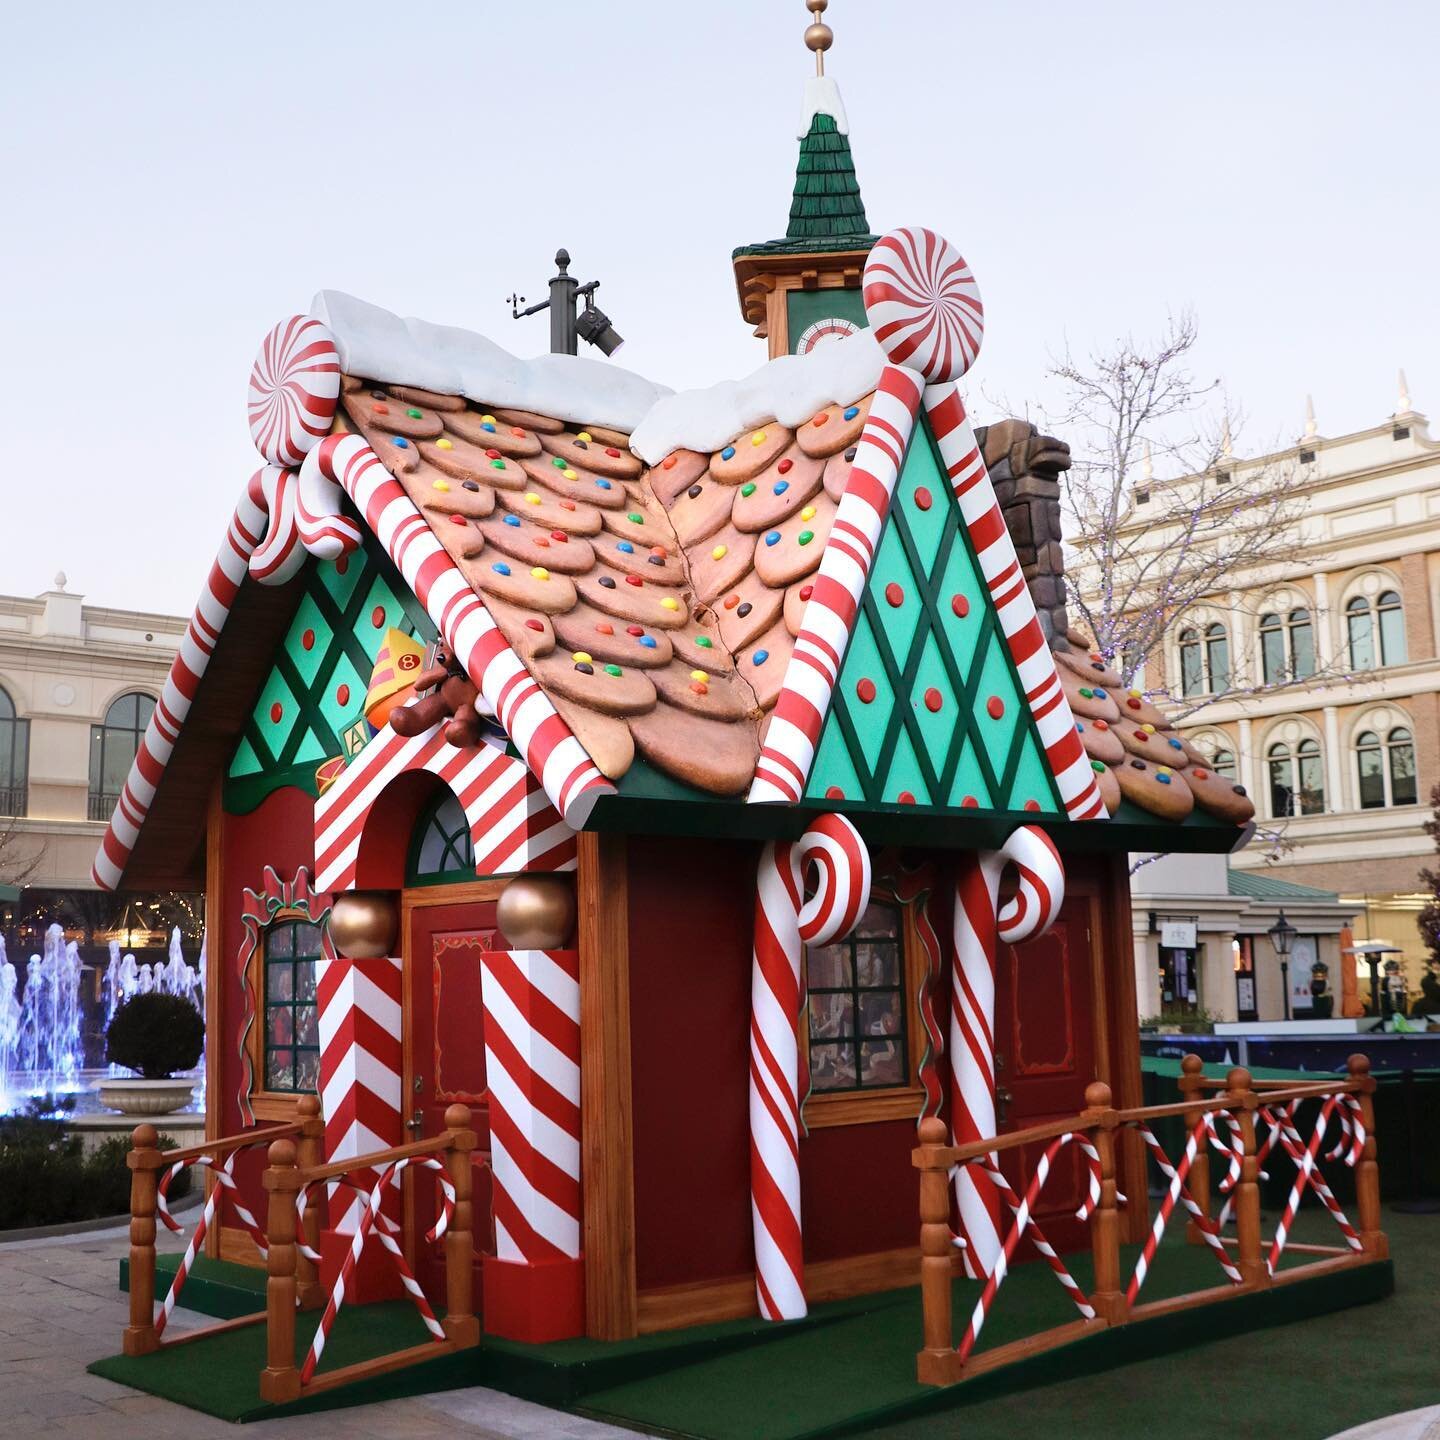 This Santa House is highly detailed everywhere you look. From the hand sculpted cookie roof, to the hand painted scroll work on the interior walls, to the life size candy structural elements on the exterior!
This festive house was built here in Los A